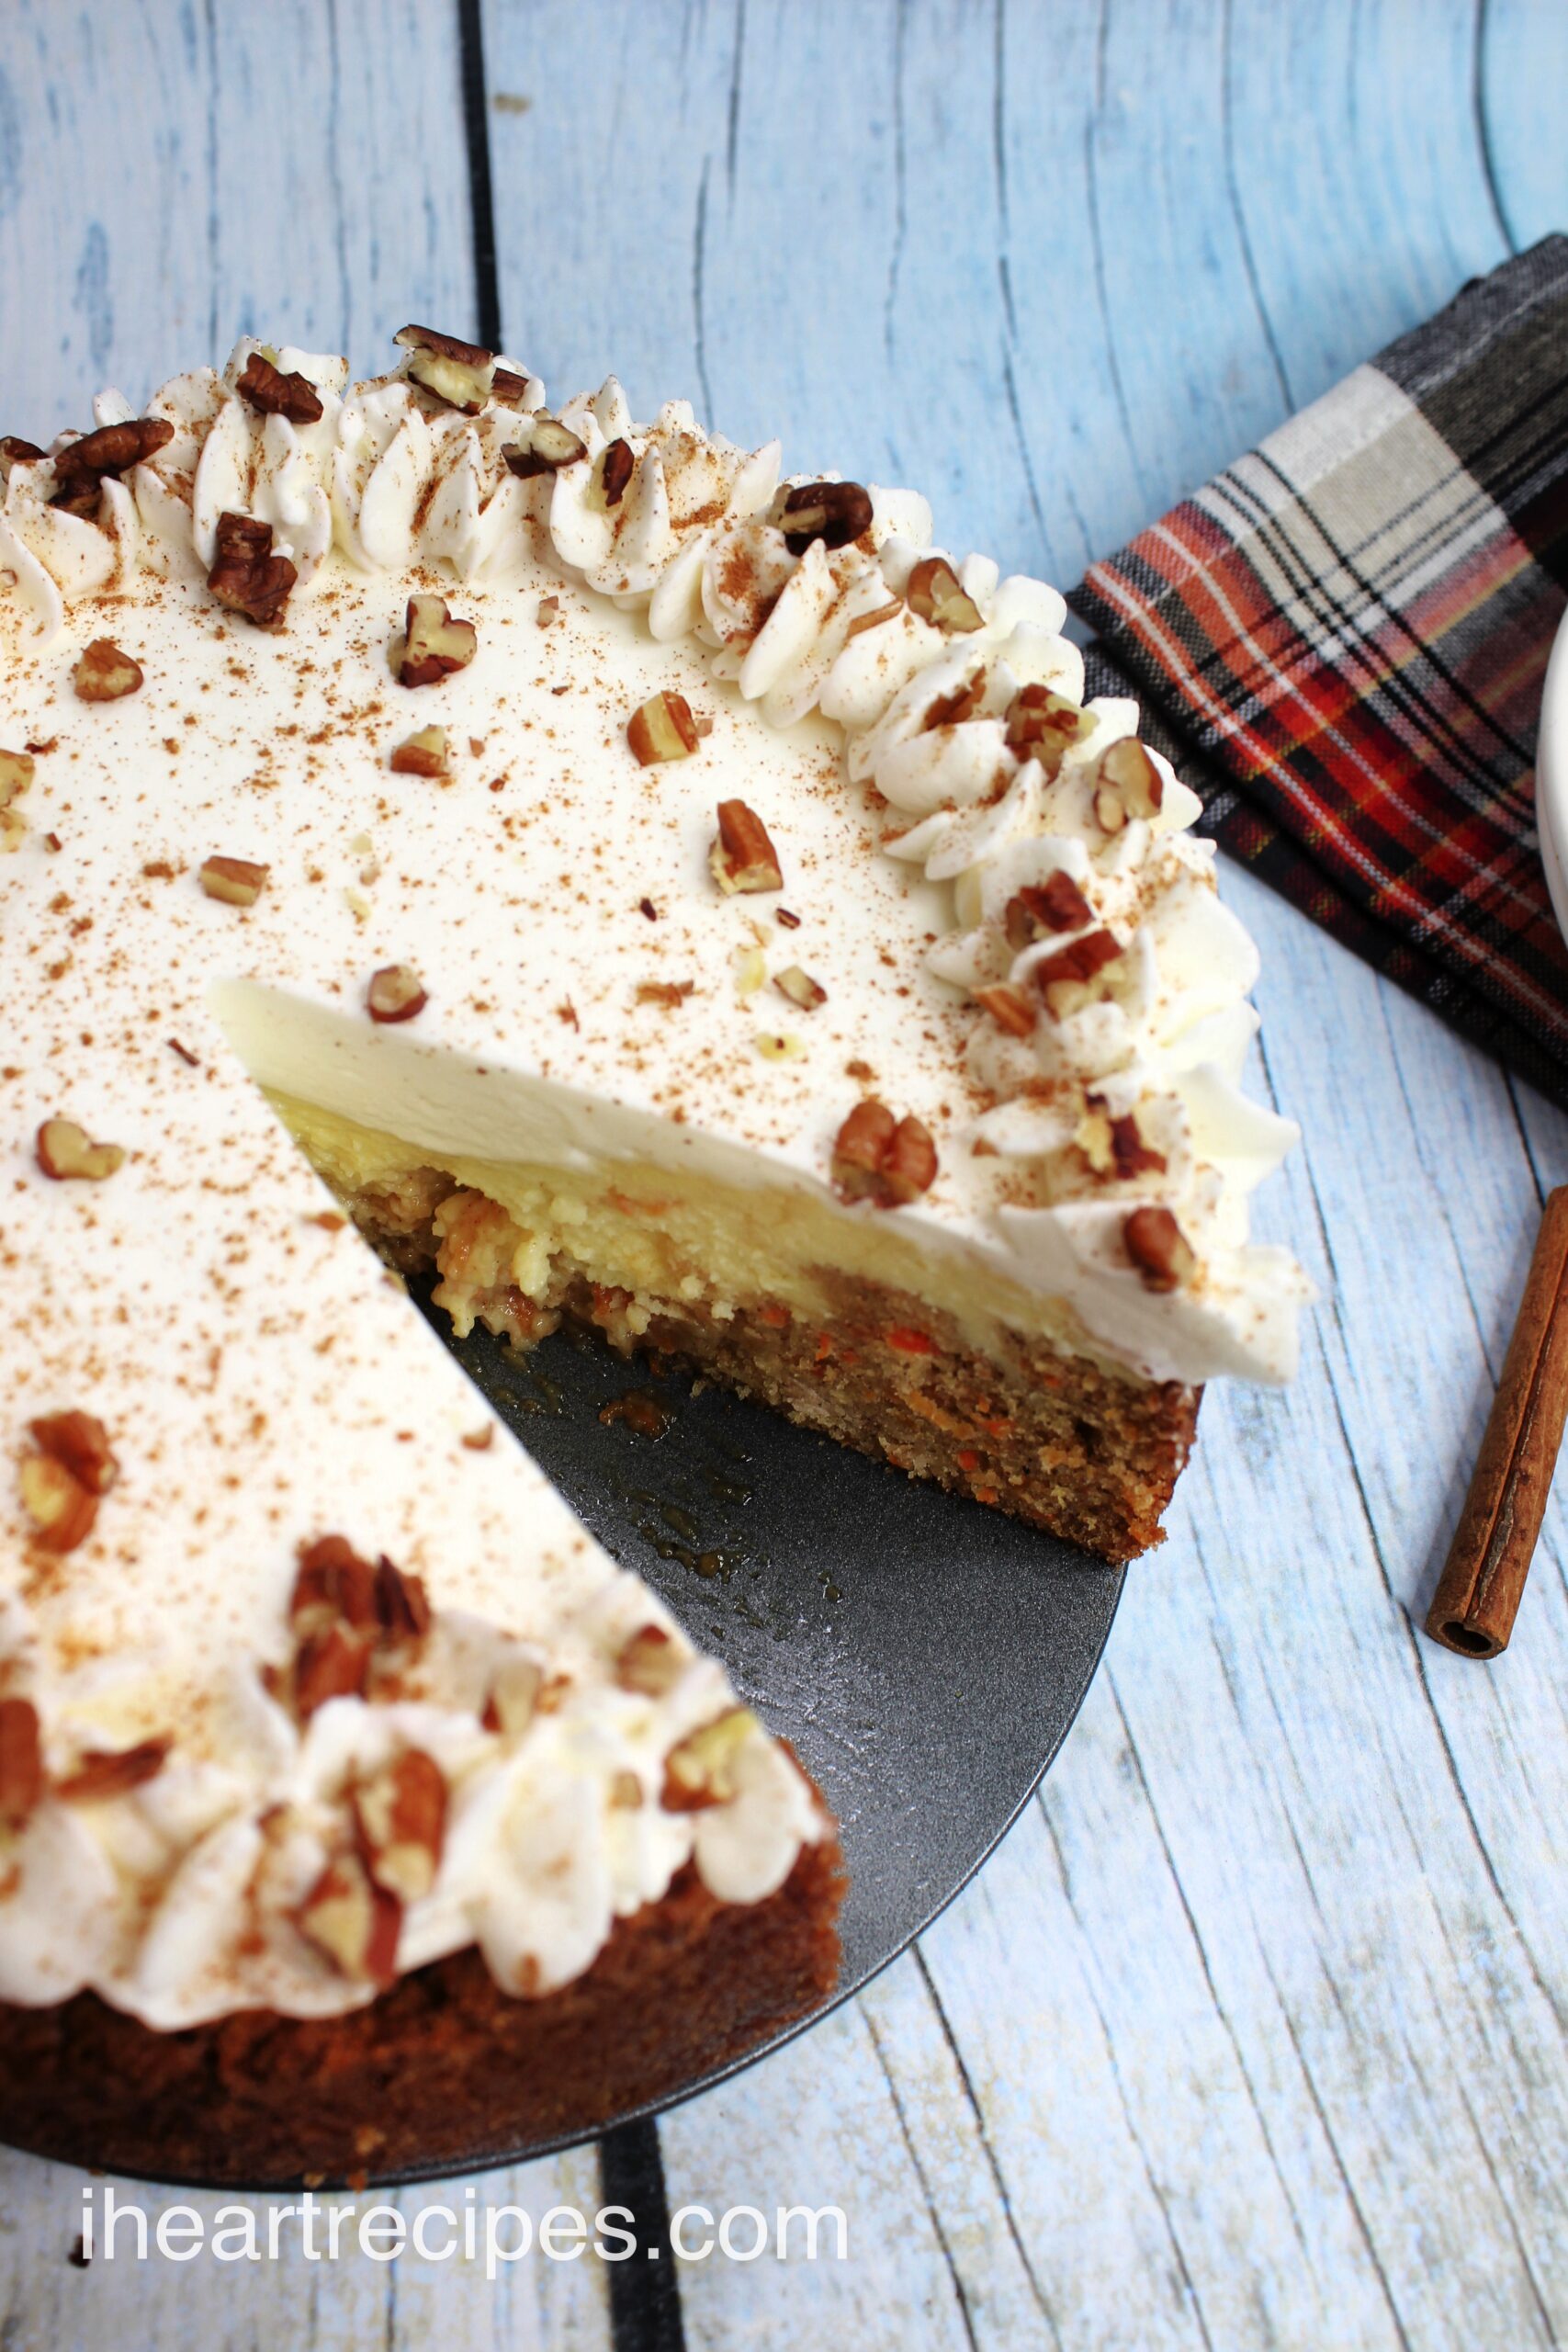 An overhead image of a whole carrot cake cheesecake with a single slice cut out. The layers of cheese cake, carrot cake, and whipped cream topping are visible inside the slice.